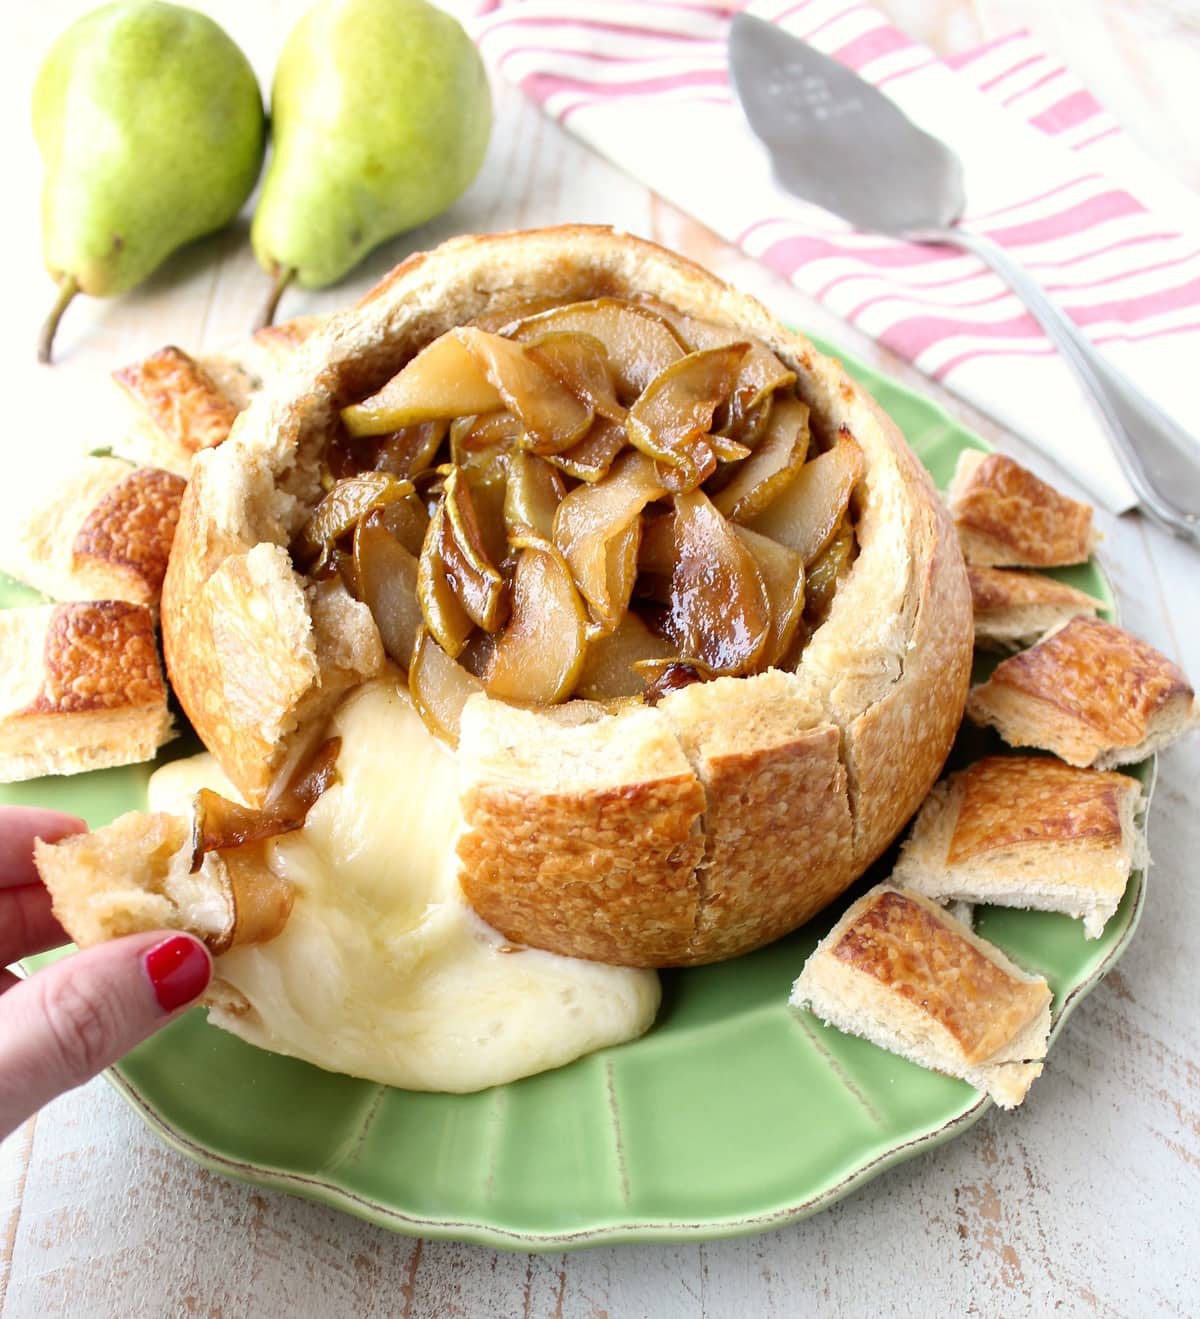 Caramelized Pear Baked Brie Bread Bowl with Fresh Pears and Toasted Pieces of Sourdough Bread